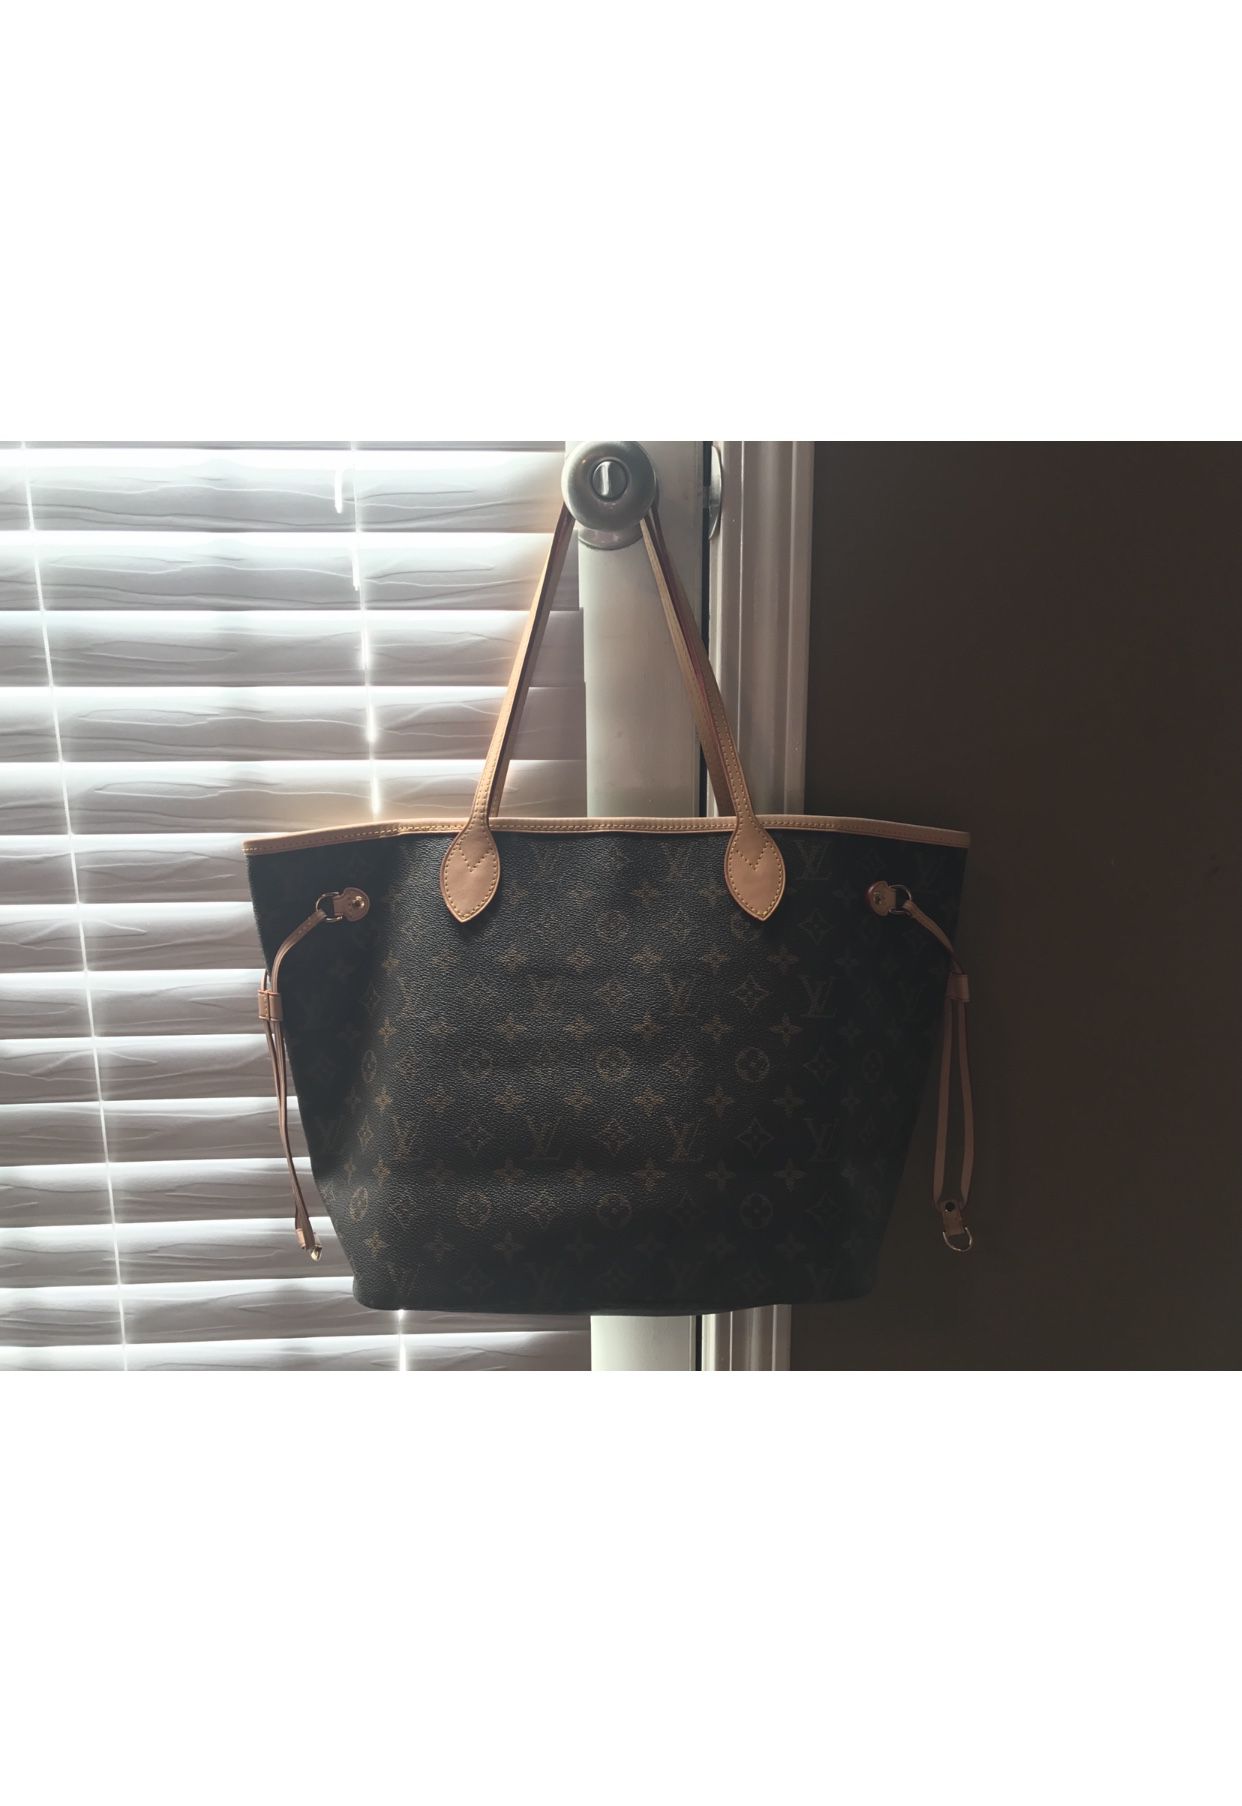 Just in Louis Vuitton Neverfull with box and receipt… like new  condition….Retails at $1605 get it here for $1195